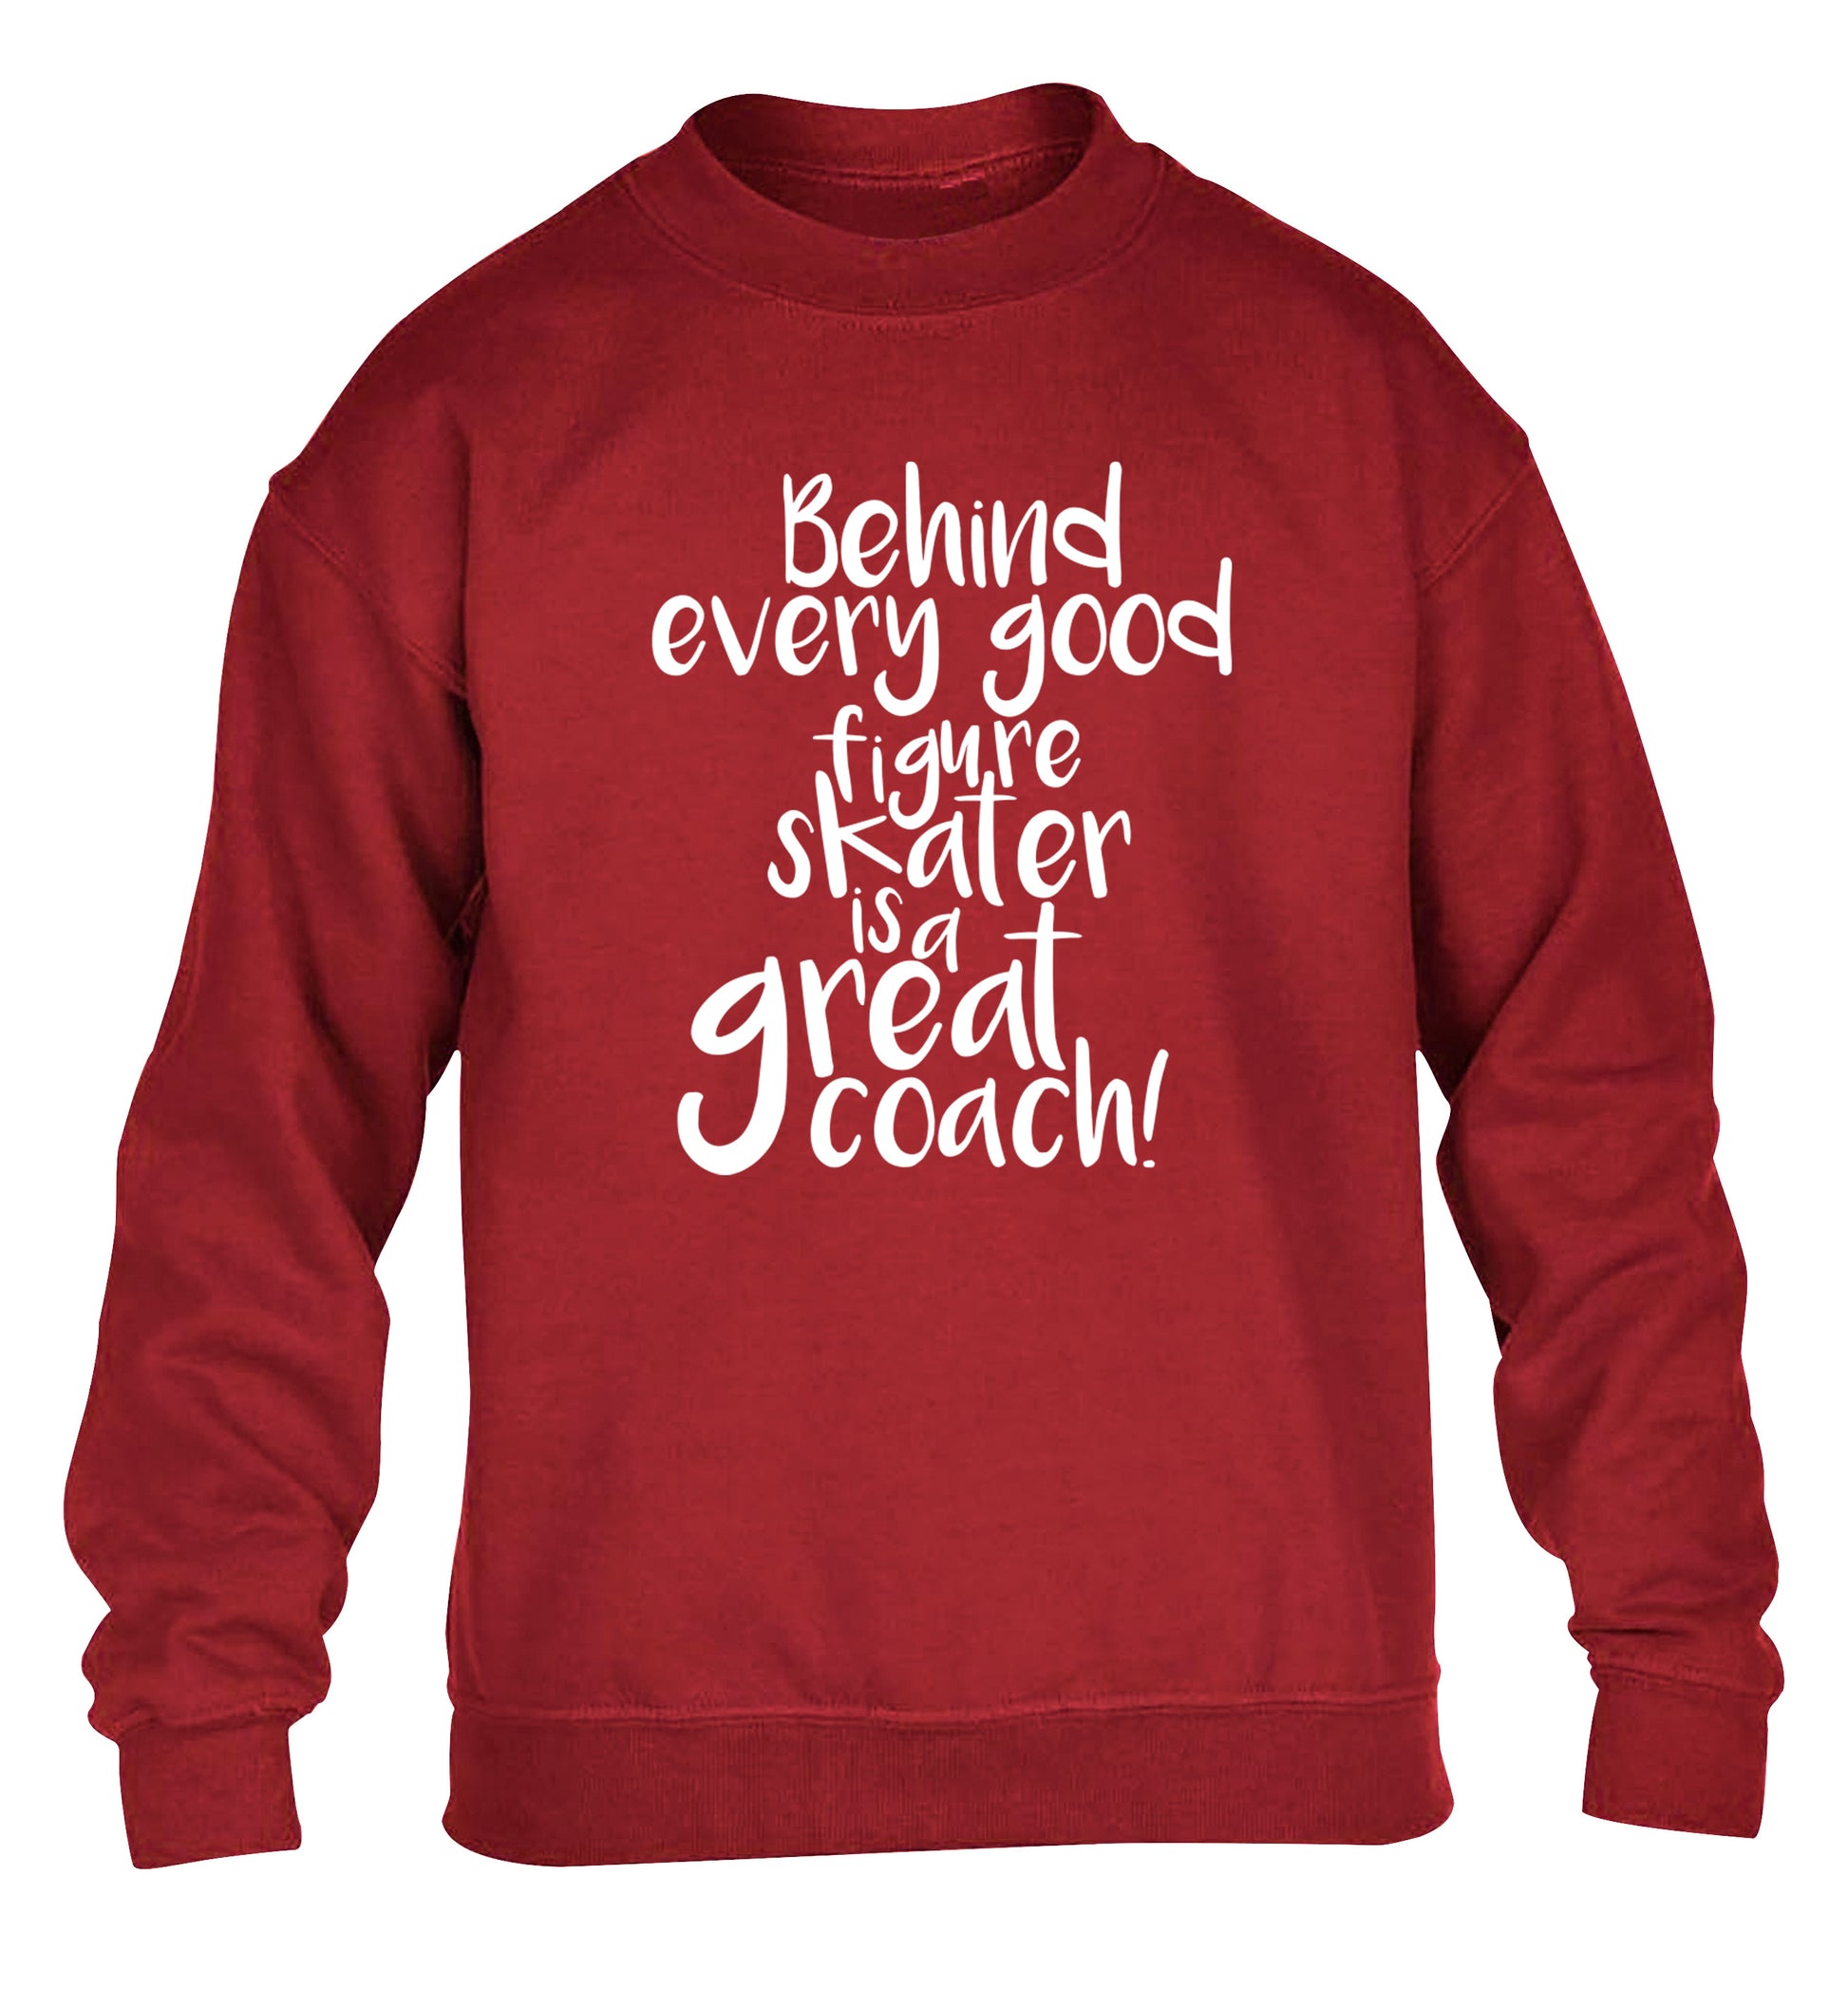 Behind every good figure skater is a great coach children's grey sweater 12-14 Years